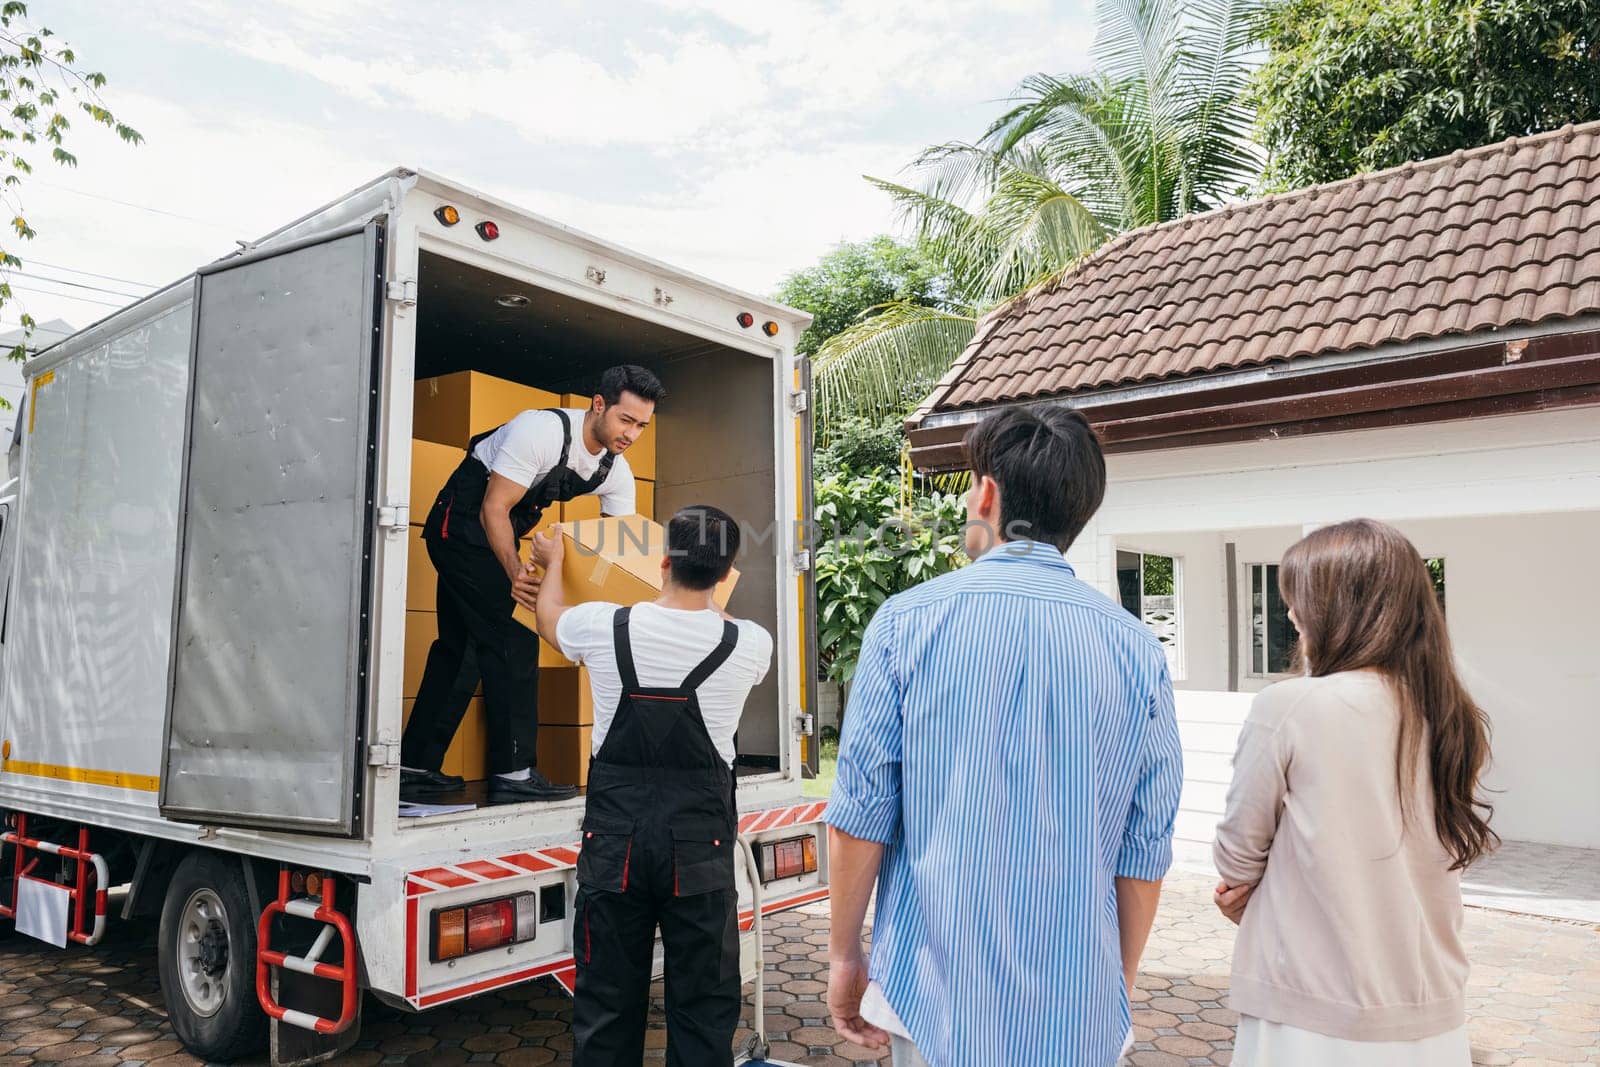 Team of workers assists a couple in moving into their new home. Together they unload and lift cardboard boxes showcasing professional and efficient delivery service. Moving Day Concept by Sorapop